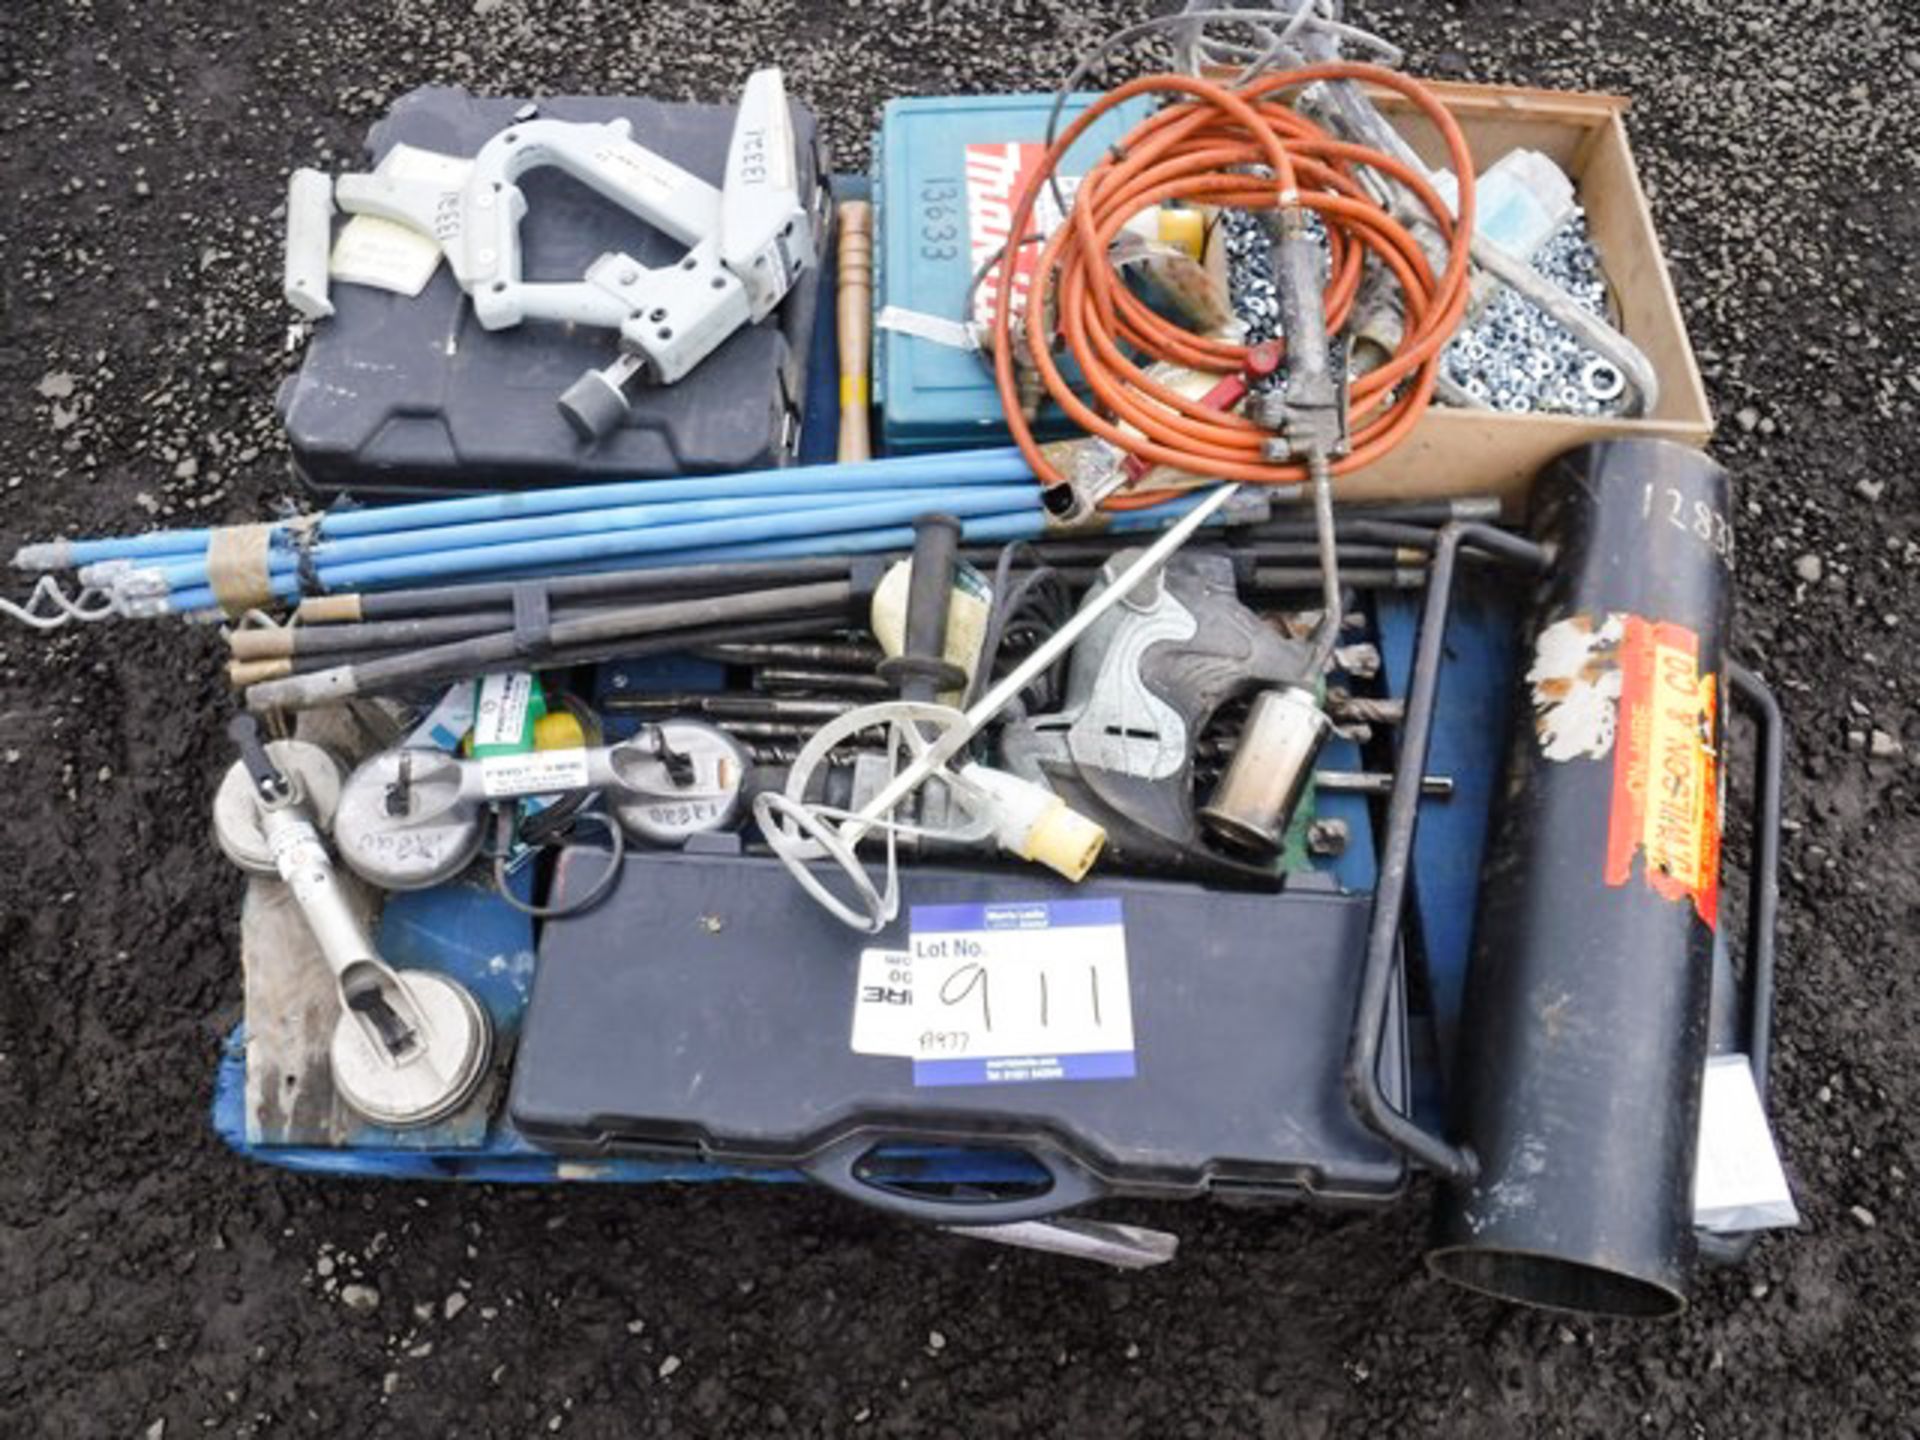 2 X PORTA NAILERS, 2 SETS OF DRAINING RODS, 2 X GAS TOUCHES, MANUAL POST CHAPPER, SAS MAX DRILL C/W